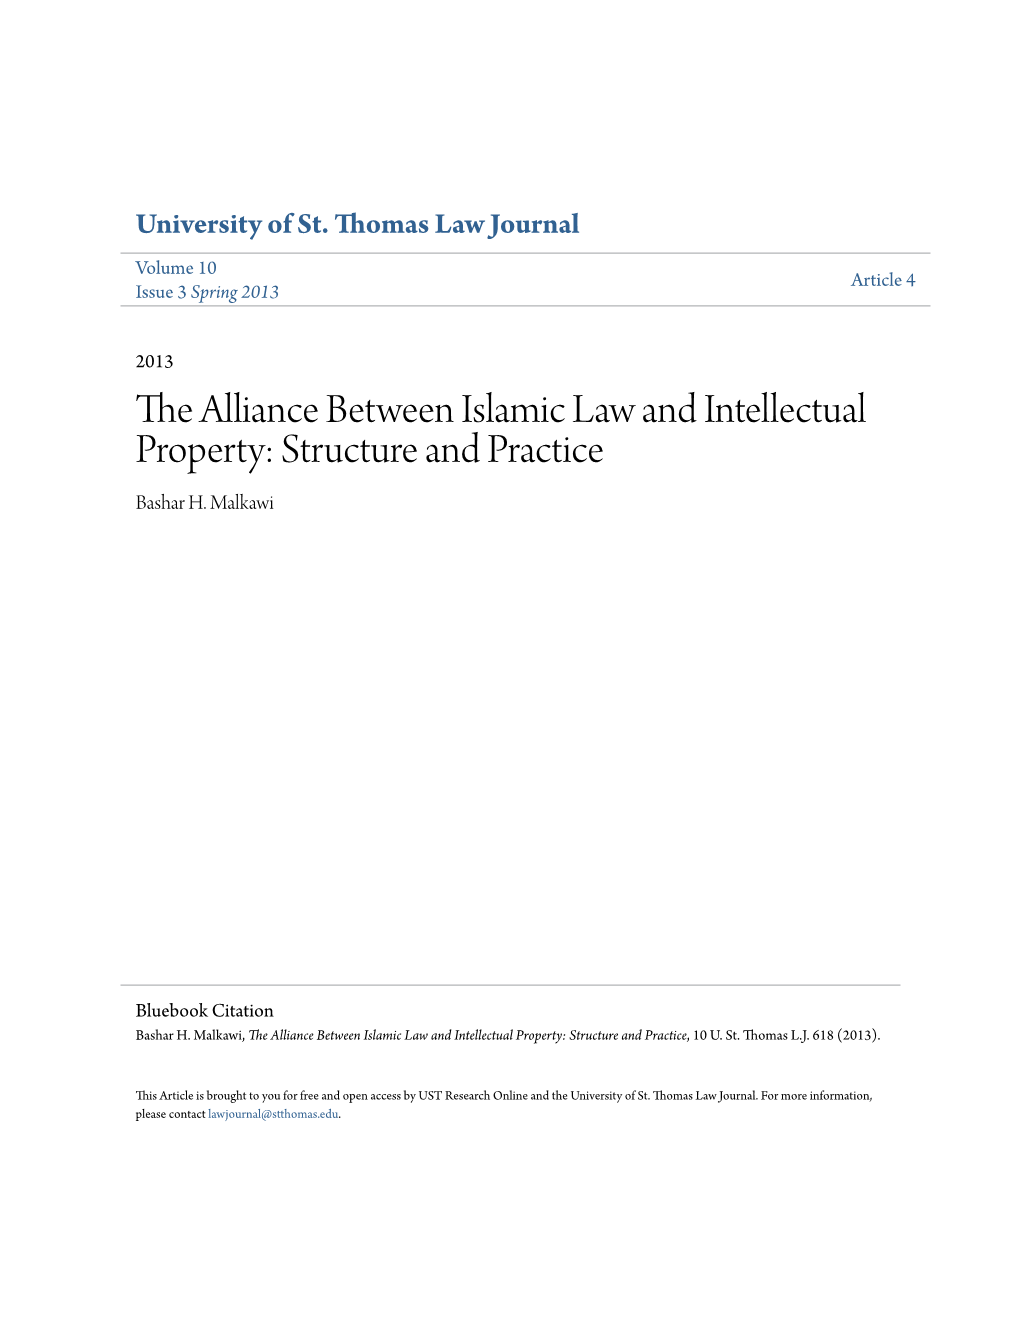 The Alliance Between Islamic Law and Intellectual Property: Structure and Practice Bashar H